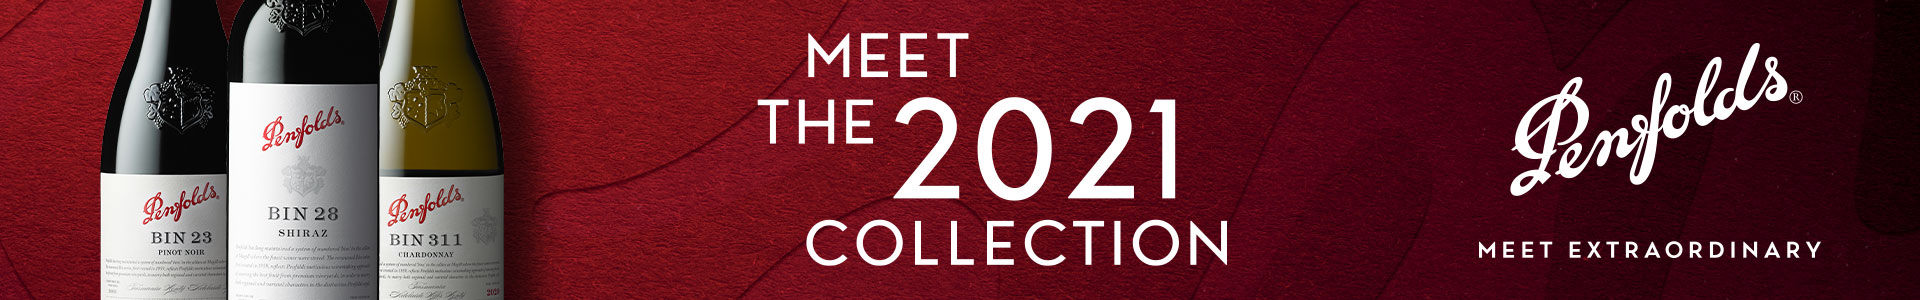 Penfolds Collection Release 2021